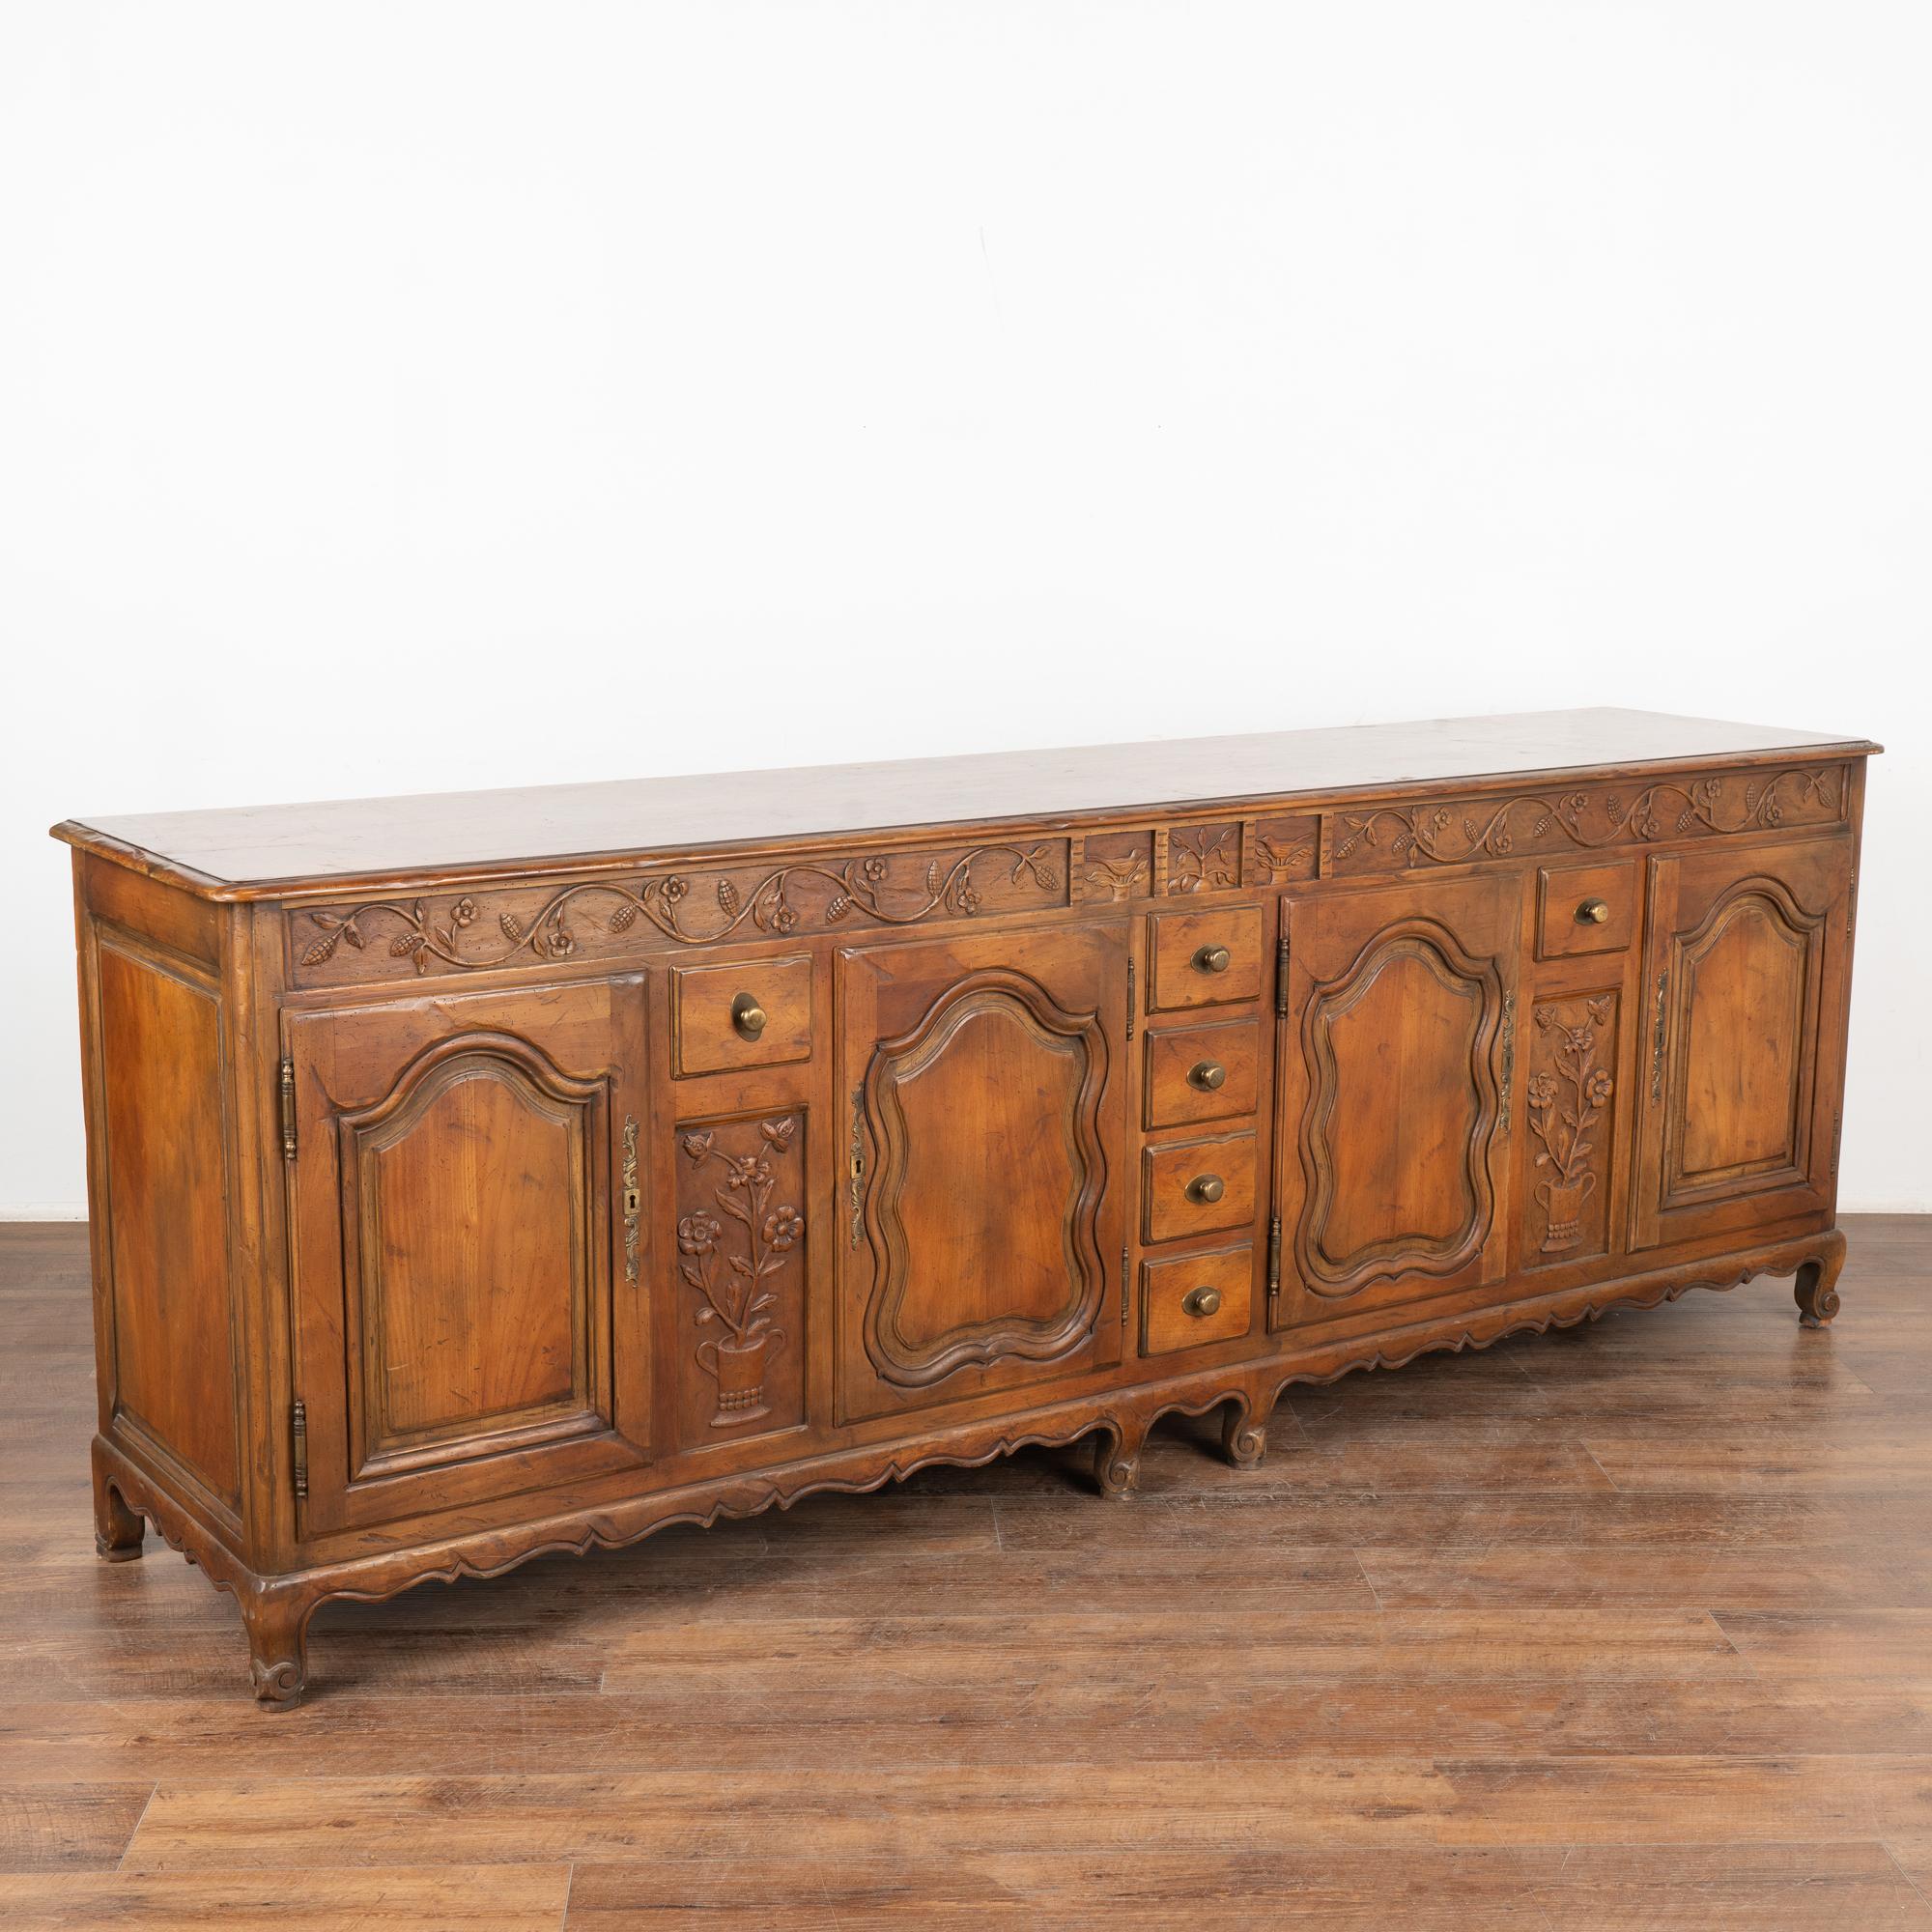 Large French walnut sideboard with traditional carved flower and vine details. At 8' long, this will serve as an impressive buffet resting on carved cabriolet feet.
Note the unique configuration of drawers both interior and exterior allowing for